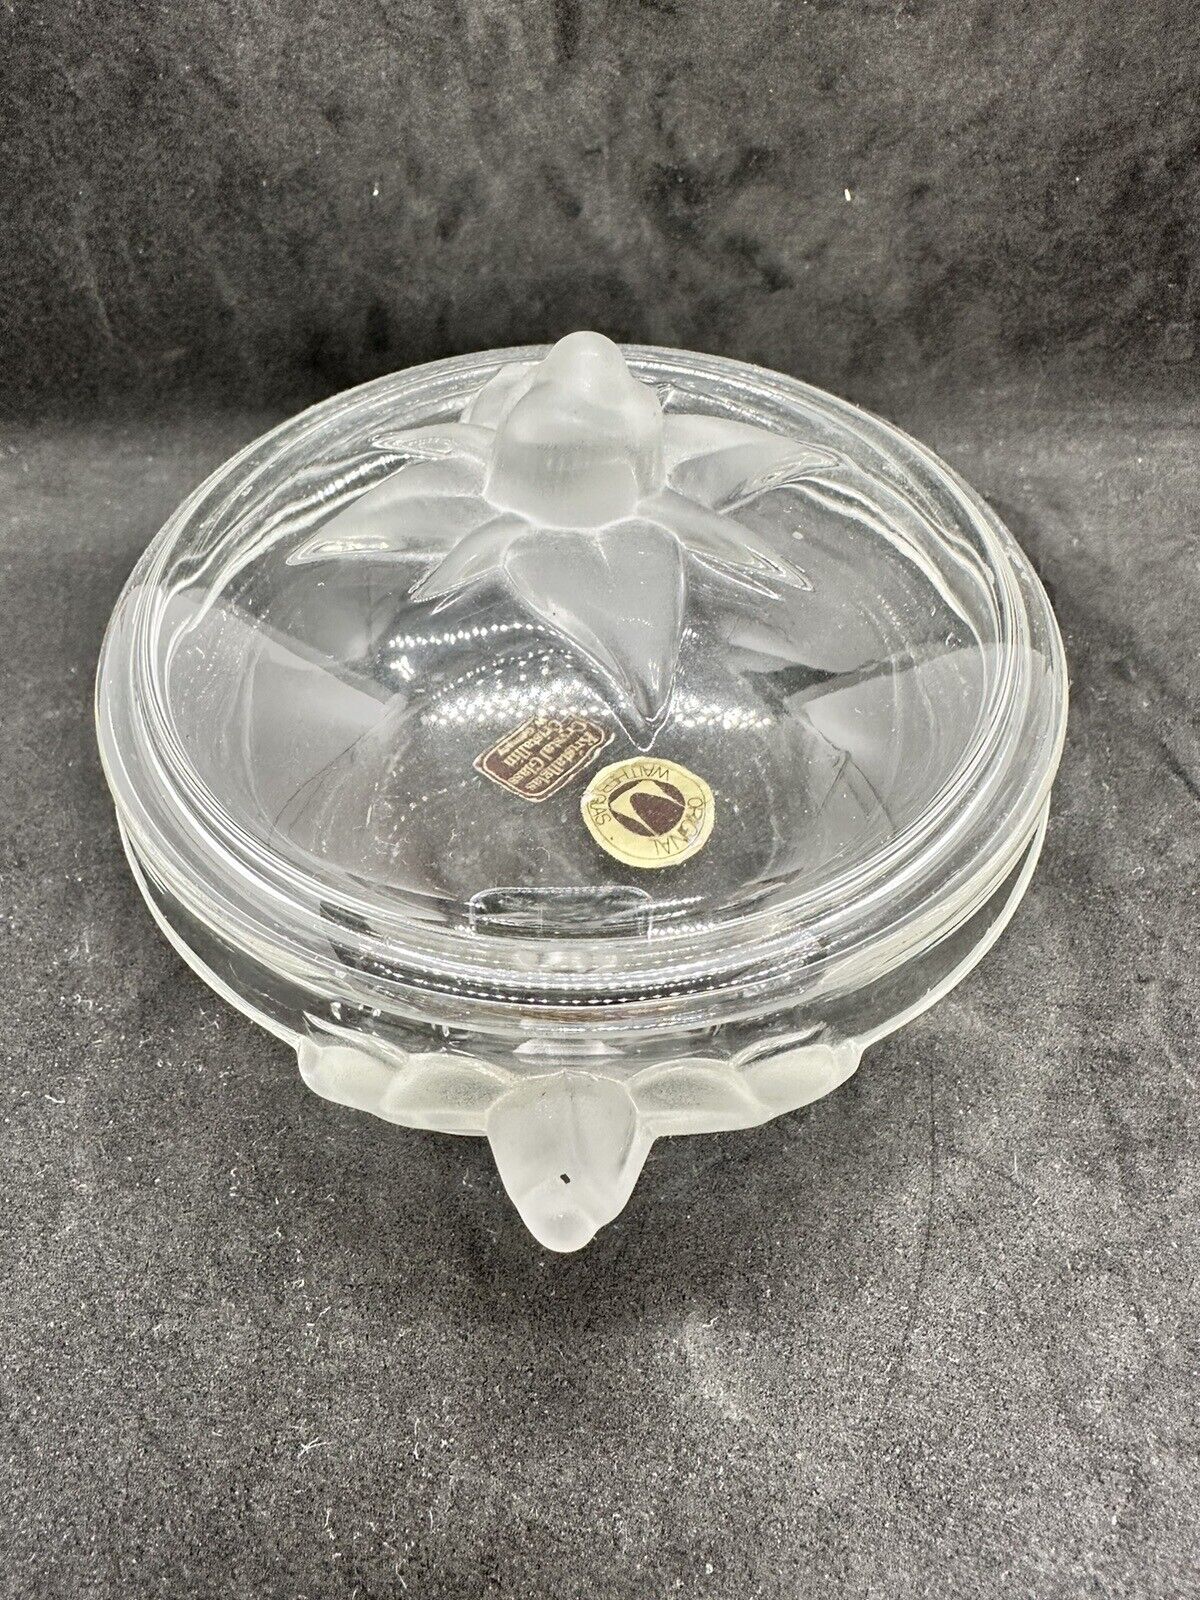 Vintage Walther Glas Crystal West Germany Lidded Trinket Dish Candy Dish 5in